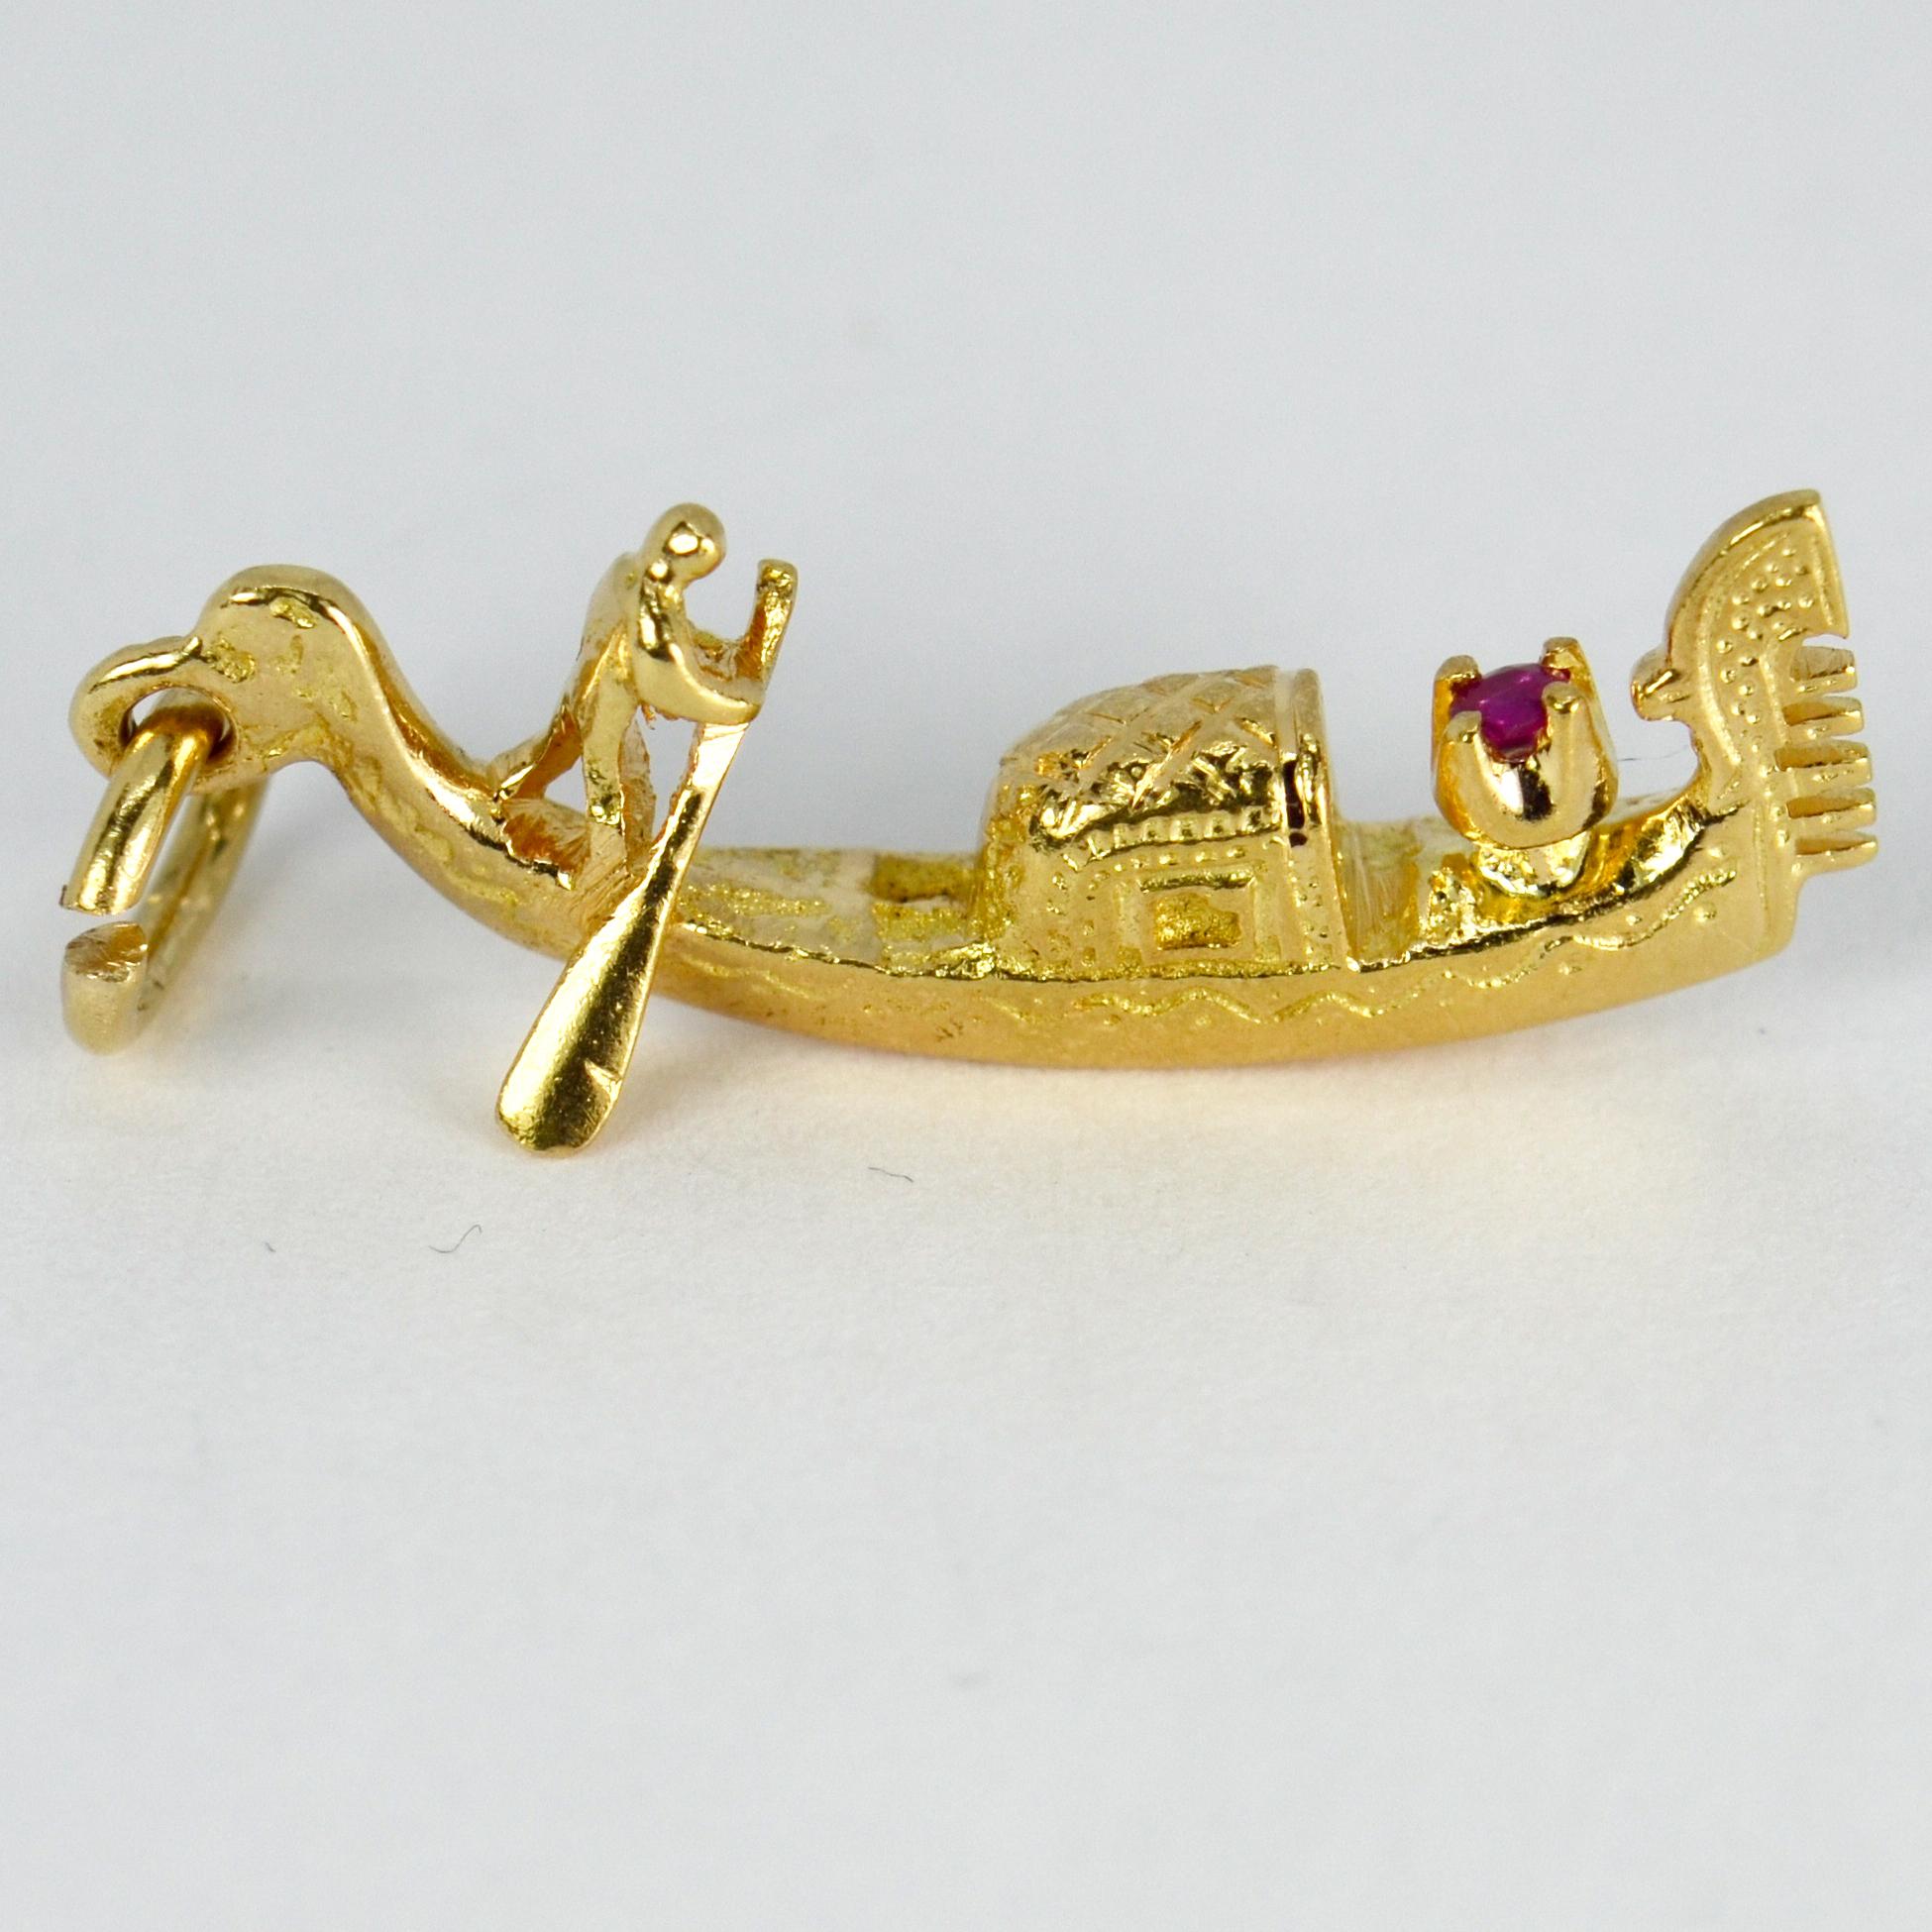 An 18 karat (18K) yellow gold charm pendant designed as a gondola typical of Venice, set with a red ruby weighing approximately 0.03 carats. Stamped 750 for 18 karat gold.

Dimensions: 2.8 x 1 x 0.4 cm (not including jump ring)
Weight: 4.24 grams
